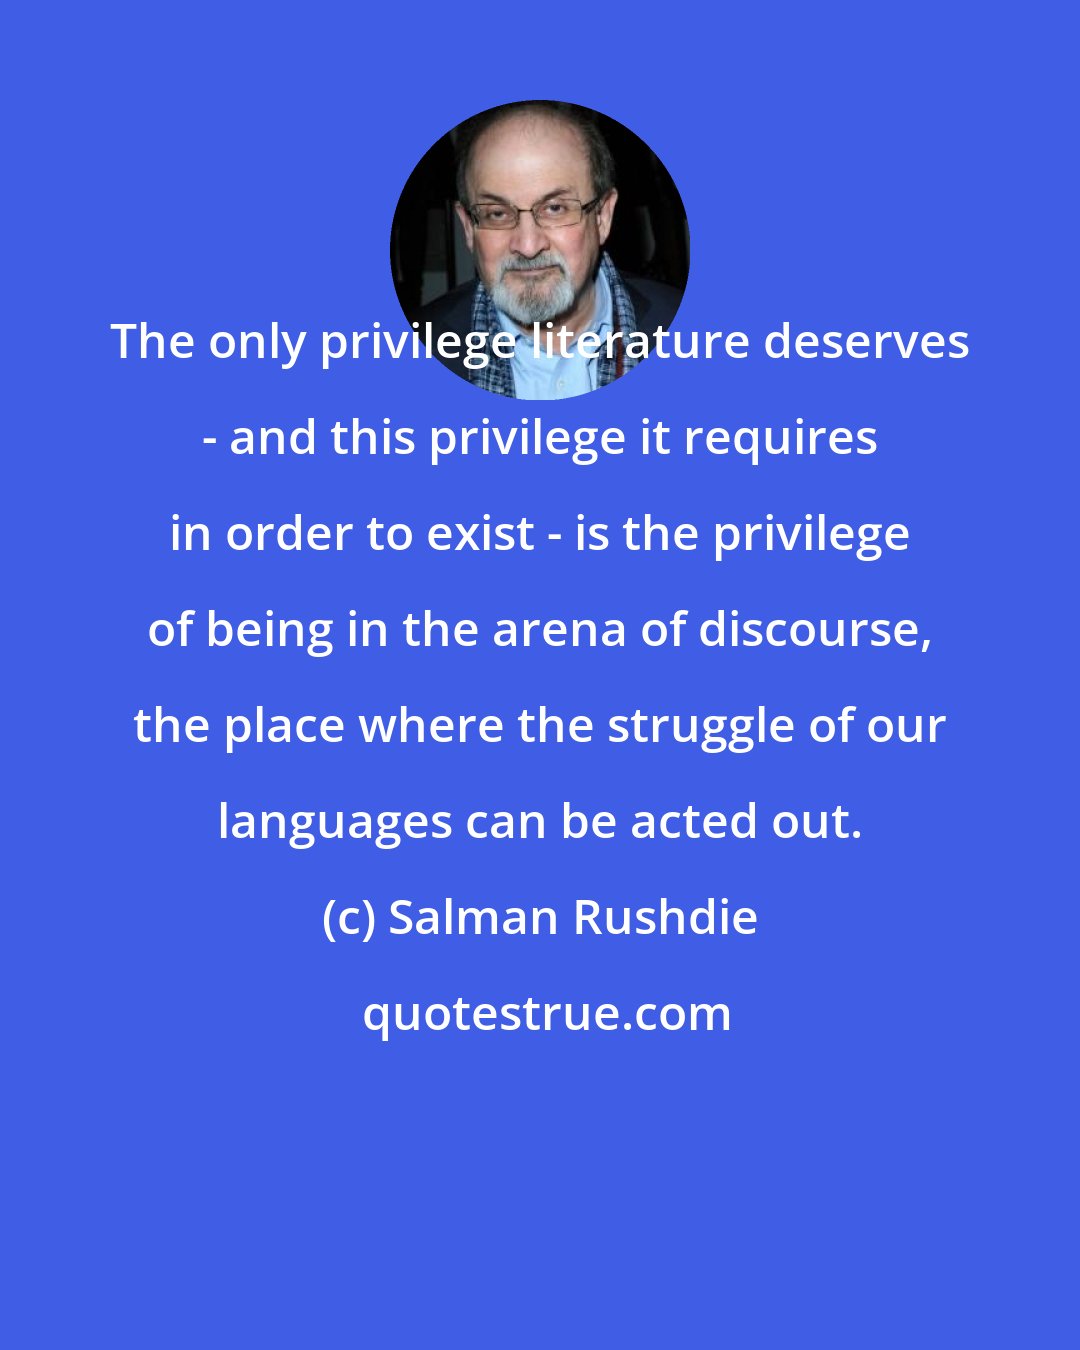 Salman Rushdie: The only privilege literature deserves - and this privilege it requires in order to exist - is the privilege of being in the arena of discourse, the place where the struggle of our languages can be acted out.